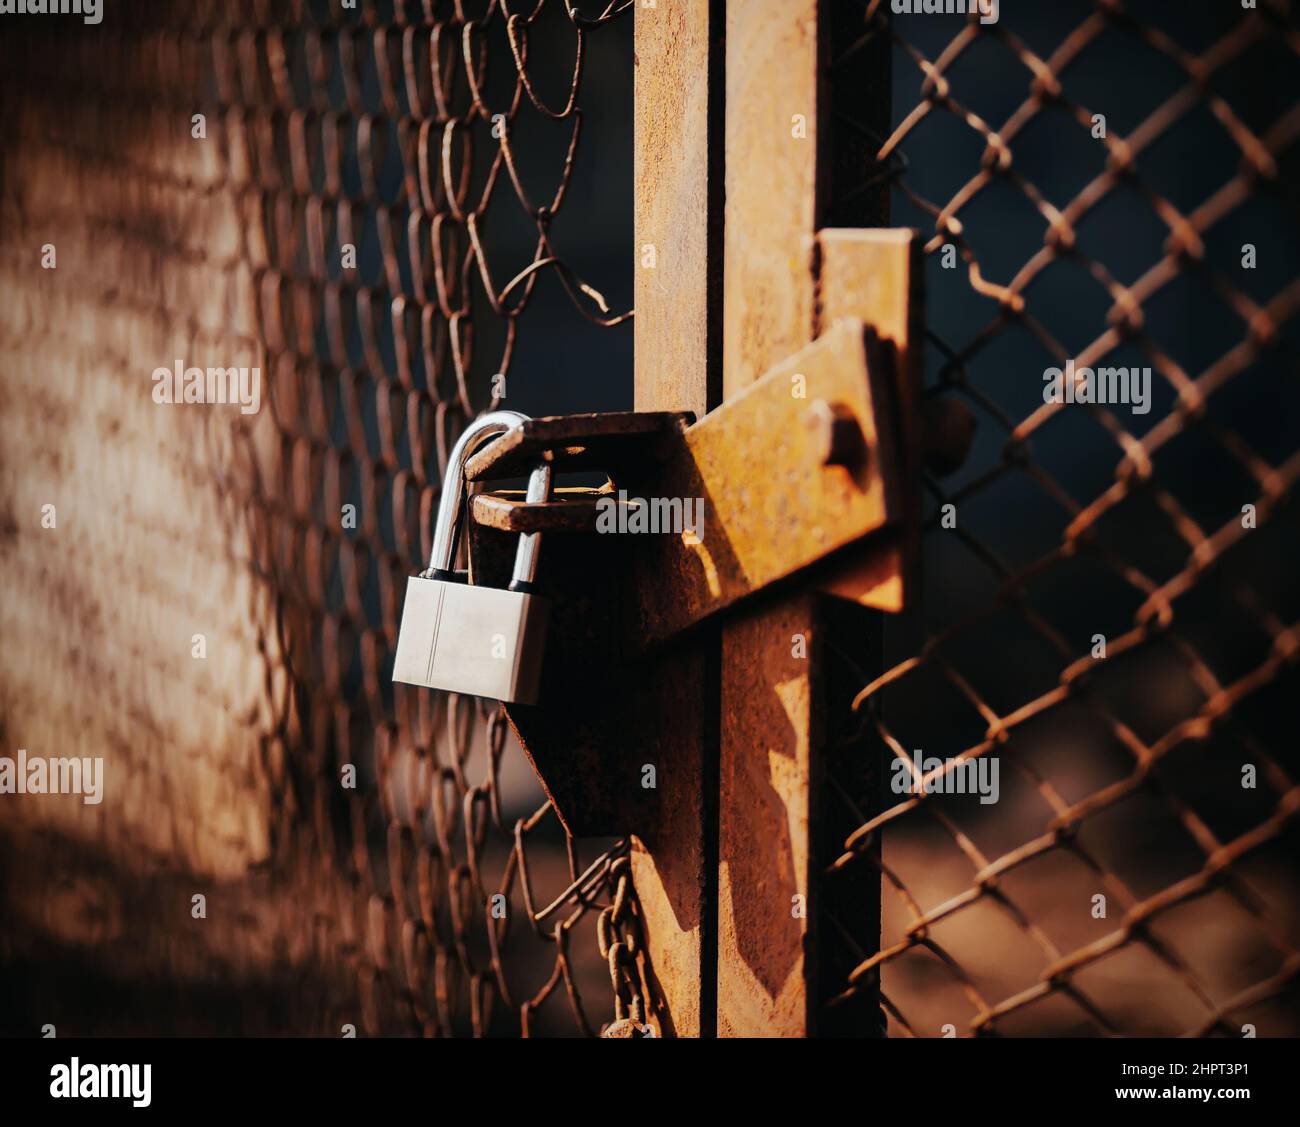 A lock hangs on the old rusty mesh broken gate, closing them, illuminated by sunlight. Abandoned territory. Stock Photo